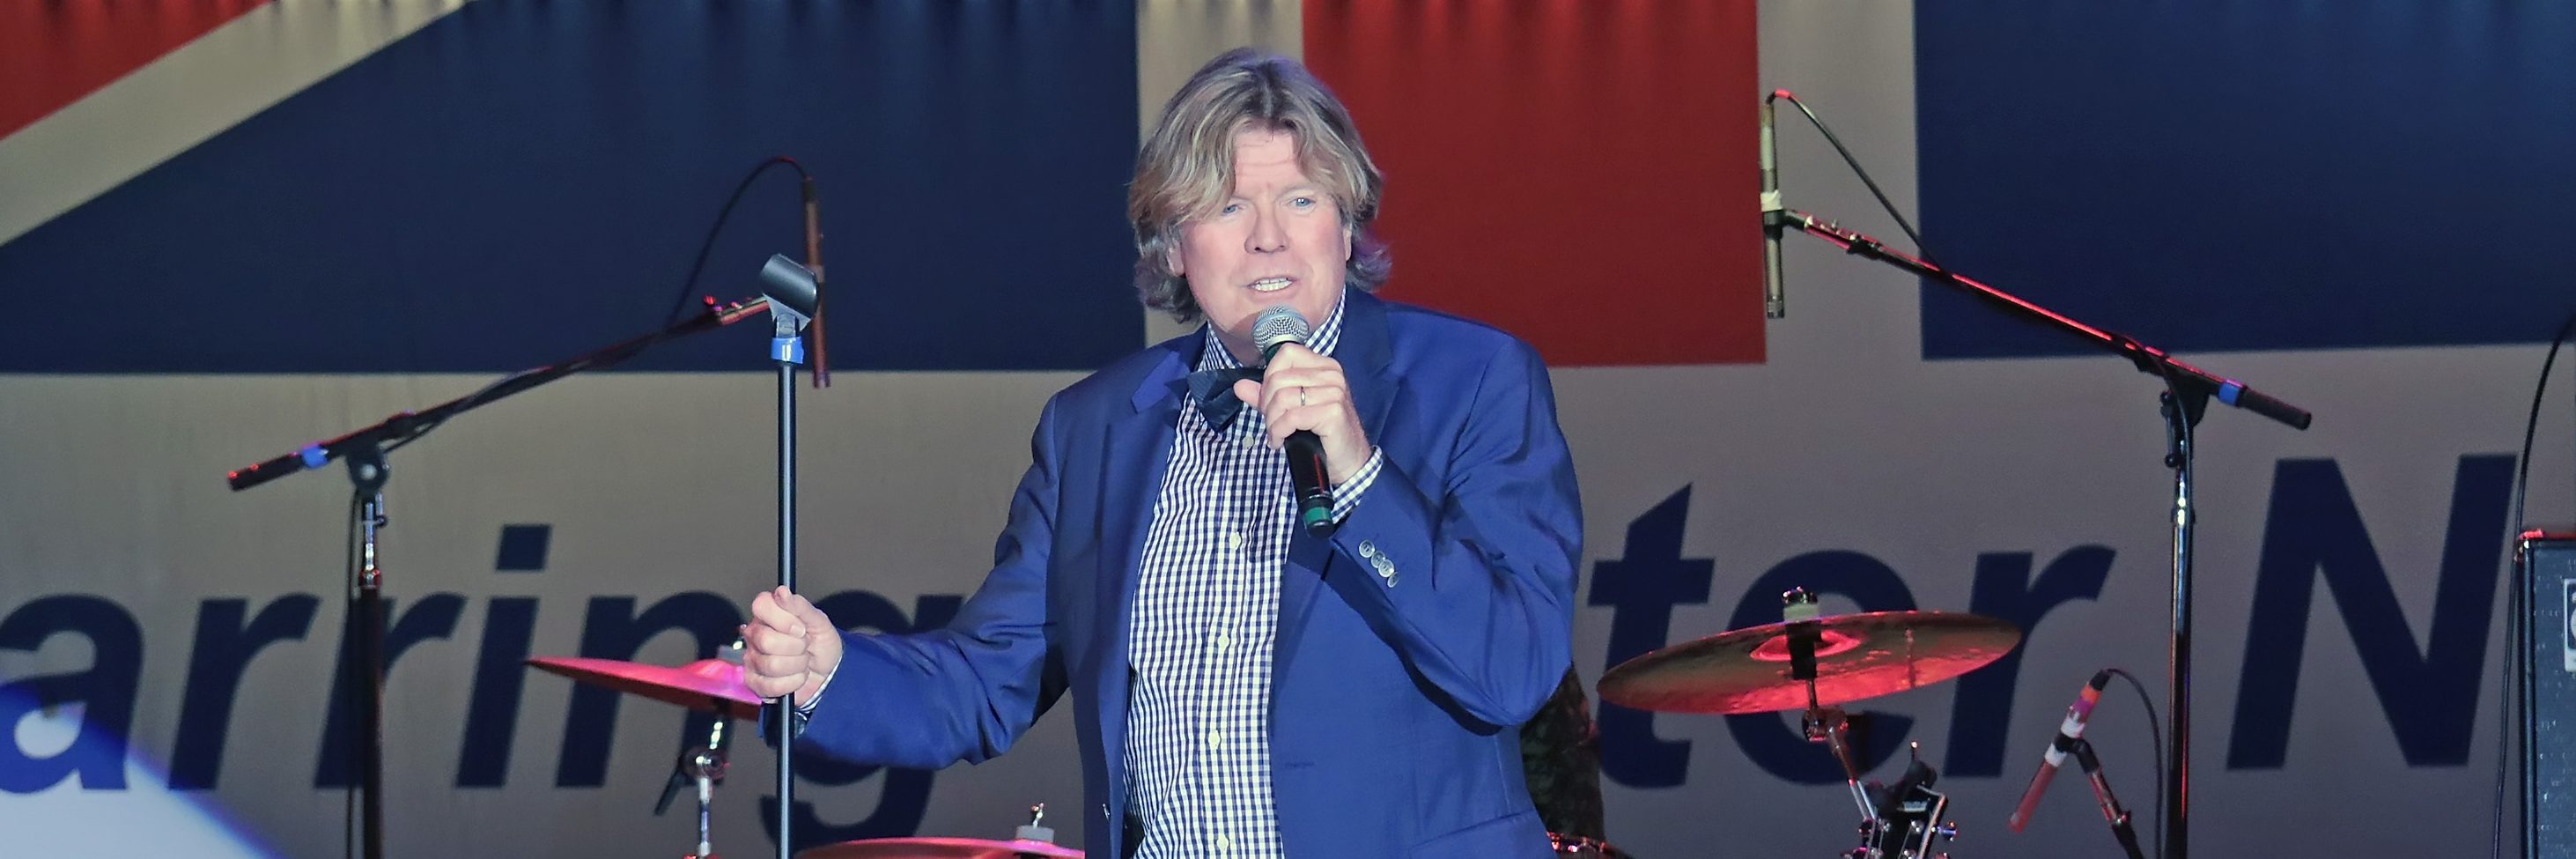 Herman’s Hermits Singer Still Rocking…..Even If He Can’t Be Herman In Home Country